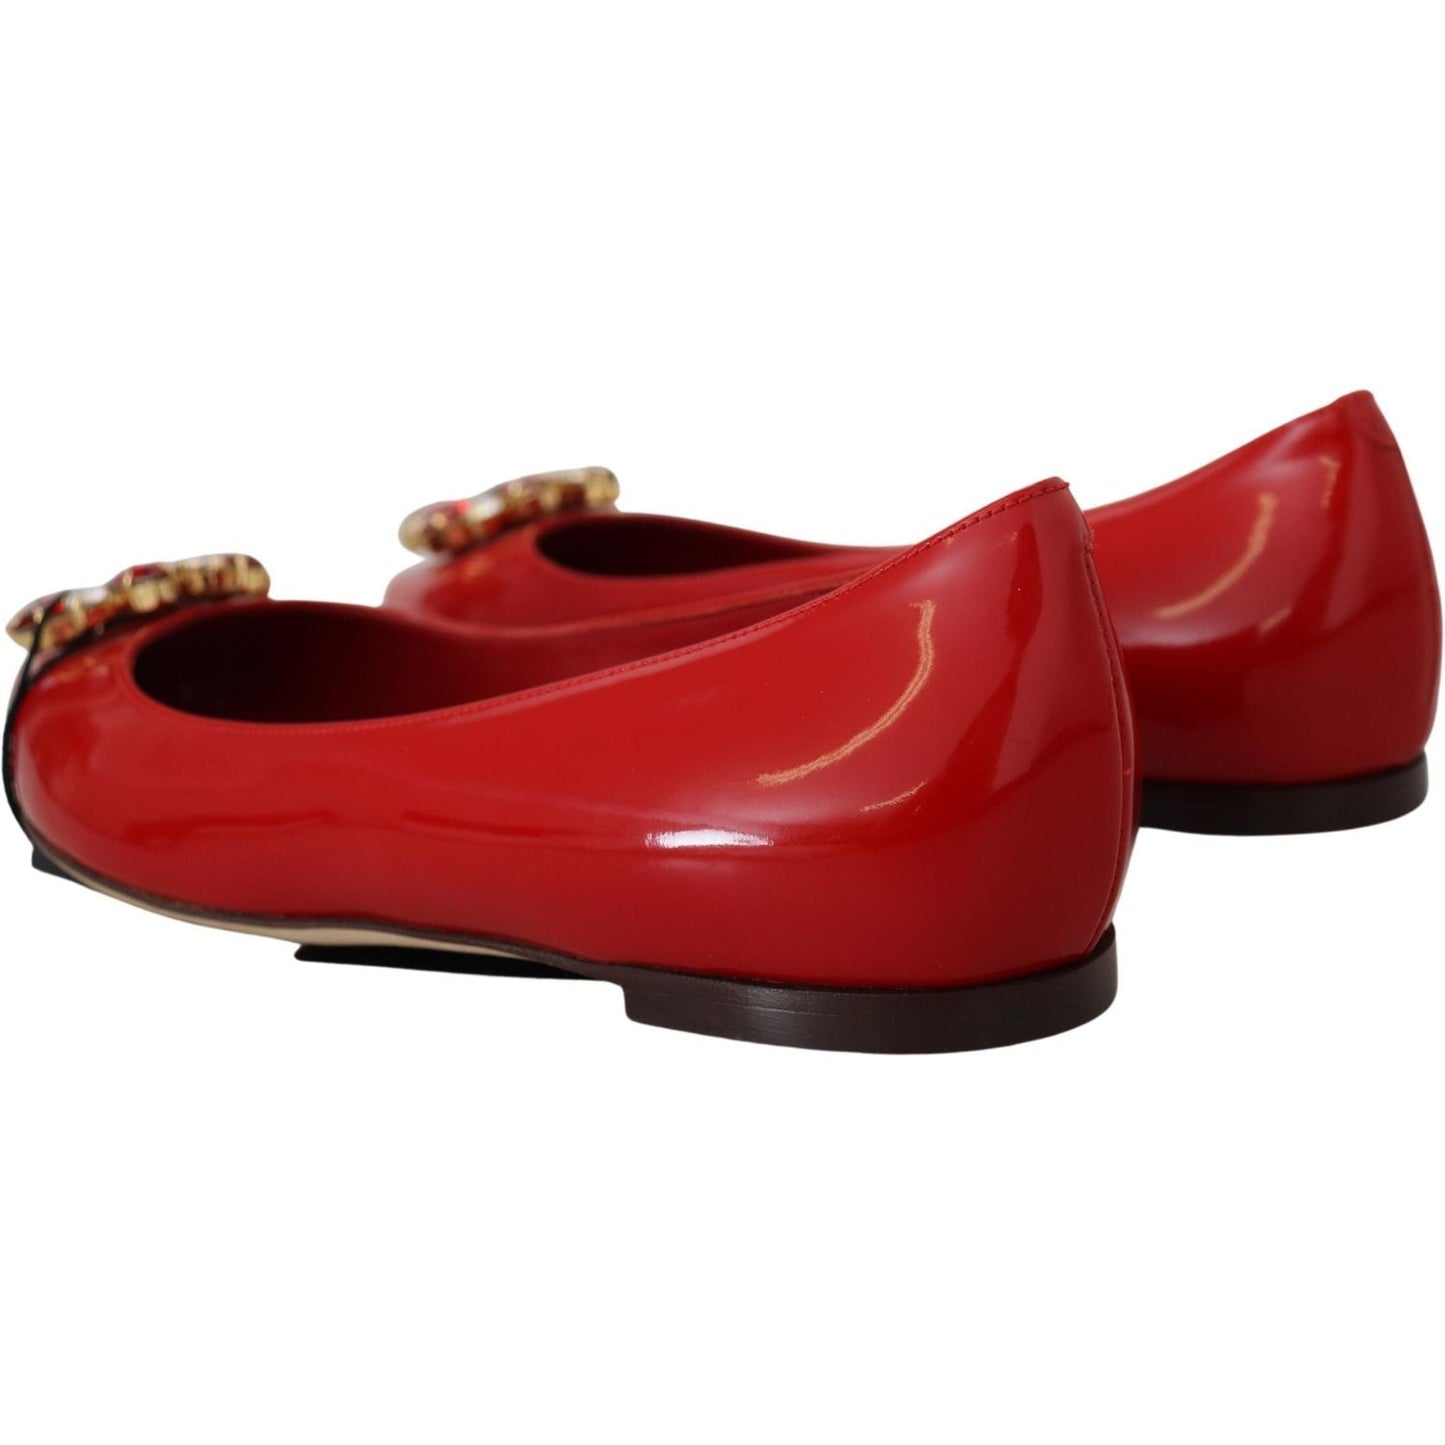 Dolce & Gabbana Red Suede Crystal Loafers - Exquisite Elegance red-leather-crystals-loafers-flats-shoes